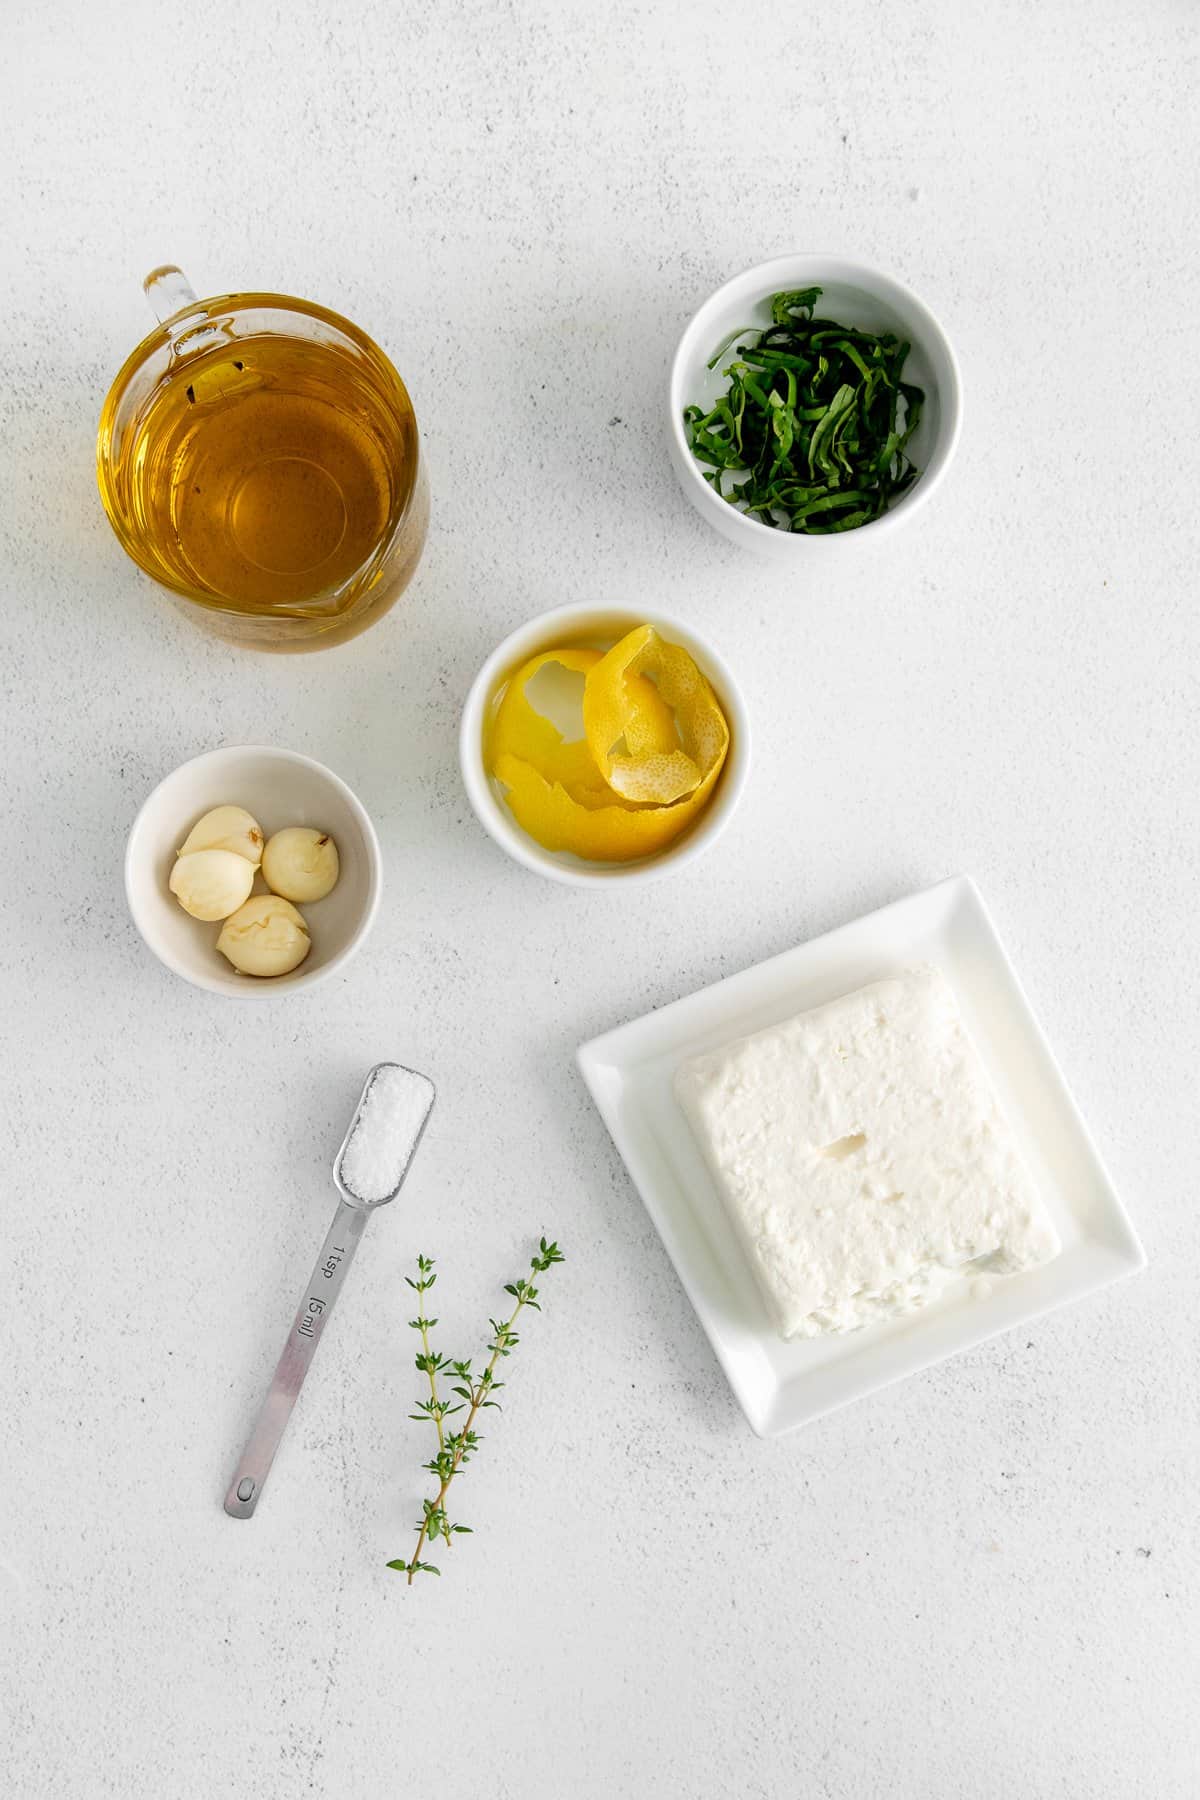 The ingredients for the marinaded feta in small dishes. 